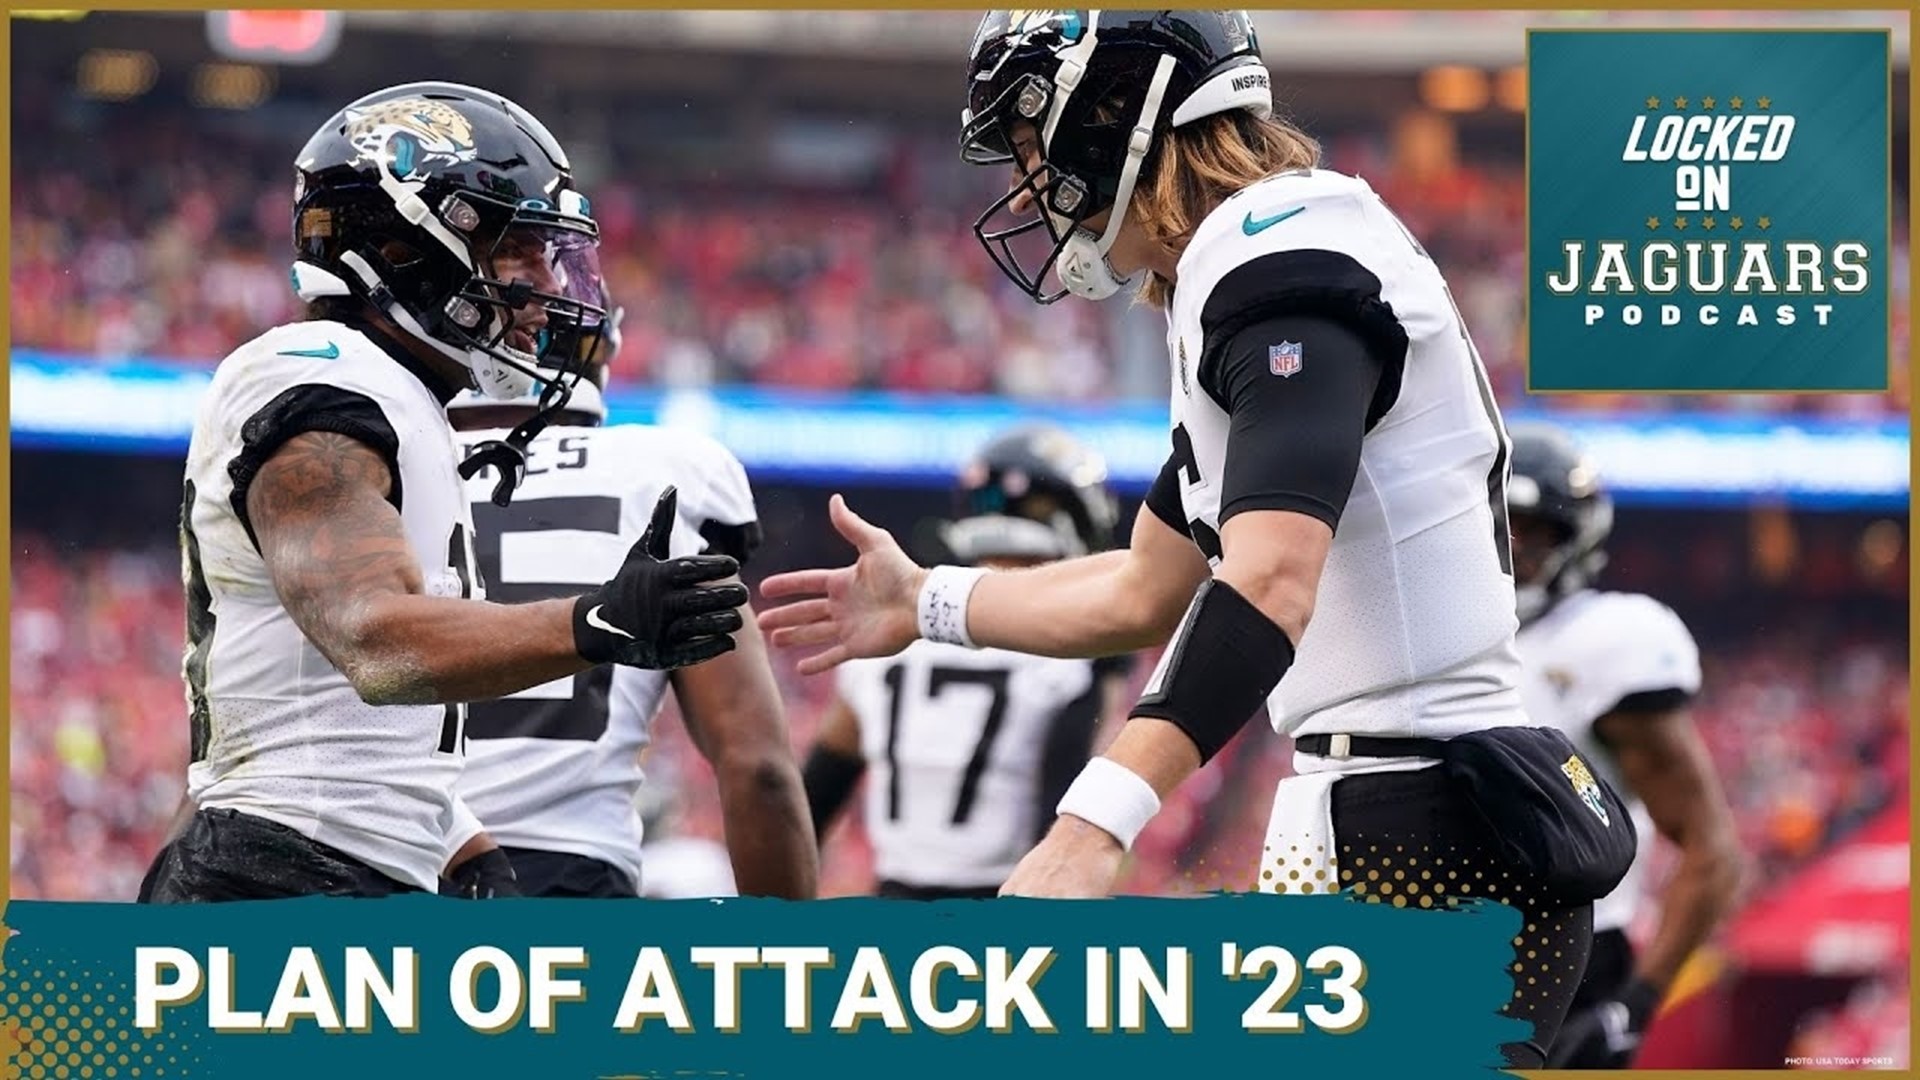 If the protection holds up the Jacksonville Jaguars offense can be lethal. The defense will certainly benefit from another year in Mike Caldwell's system